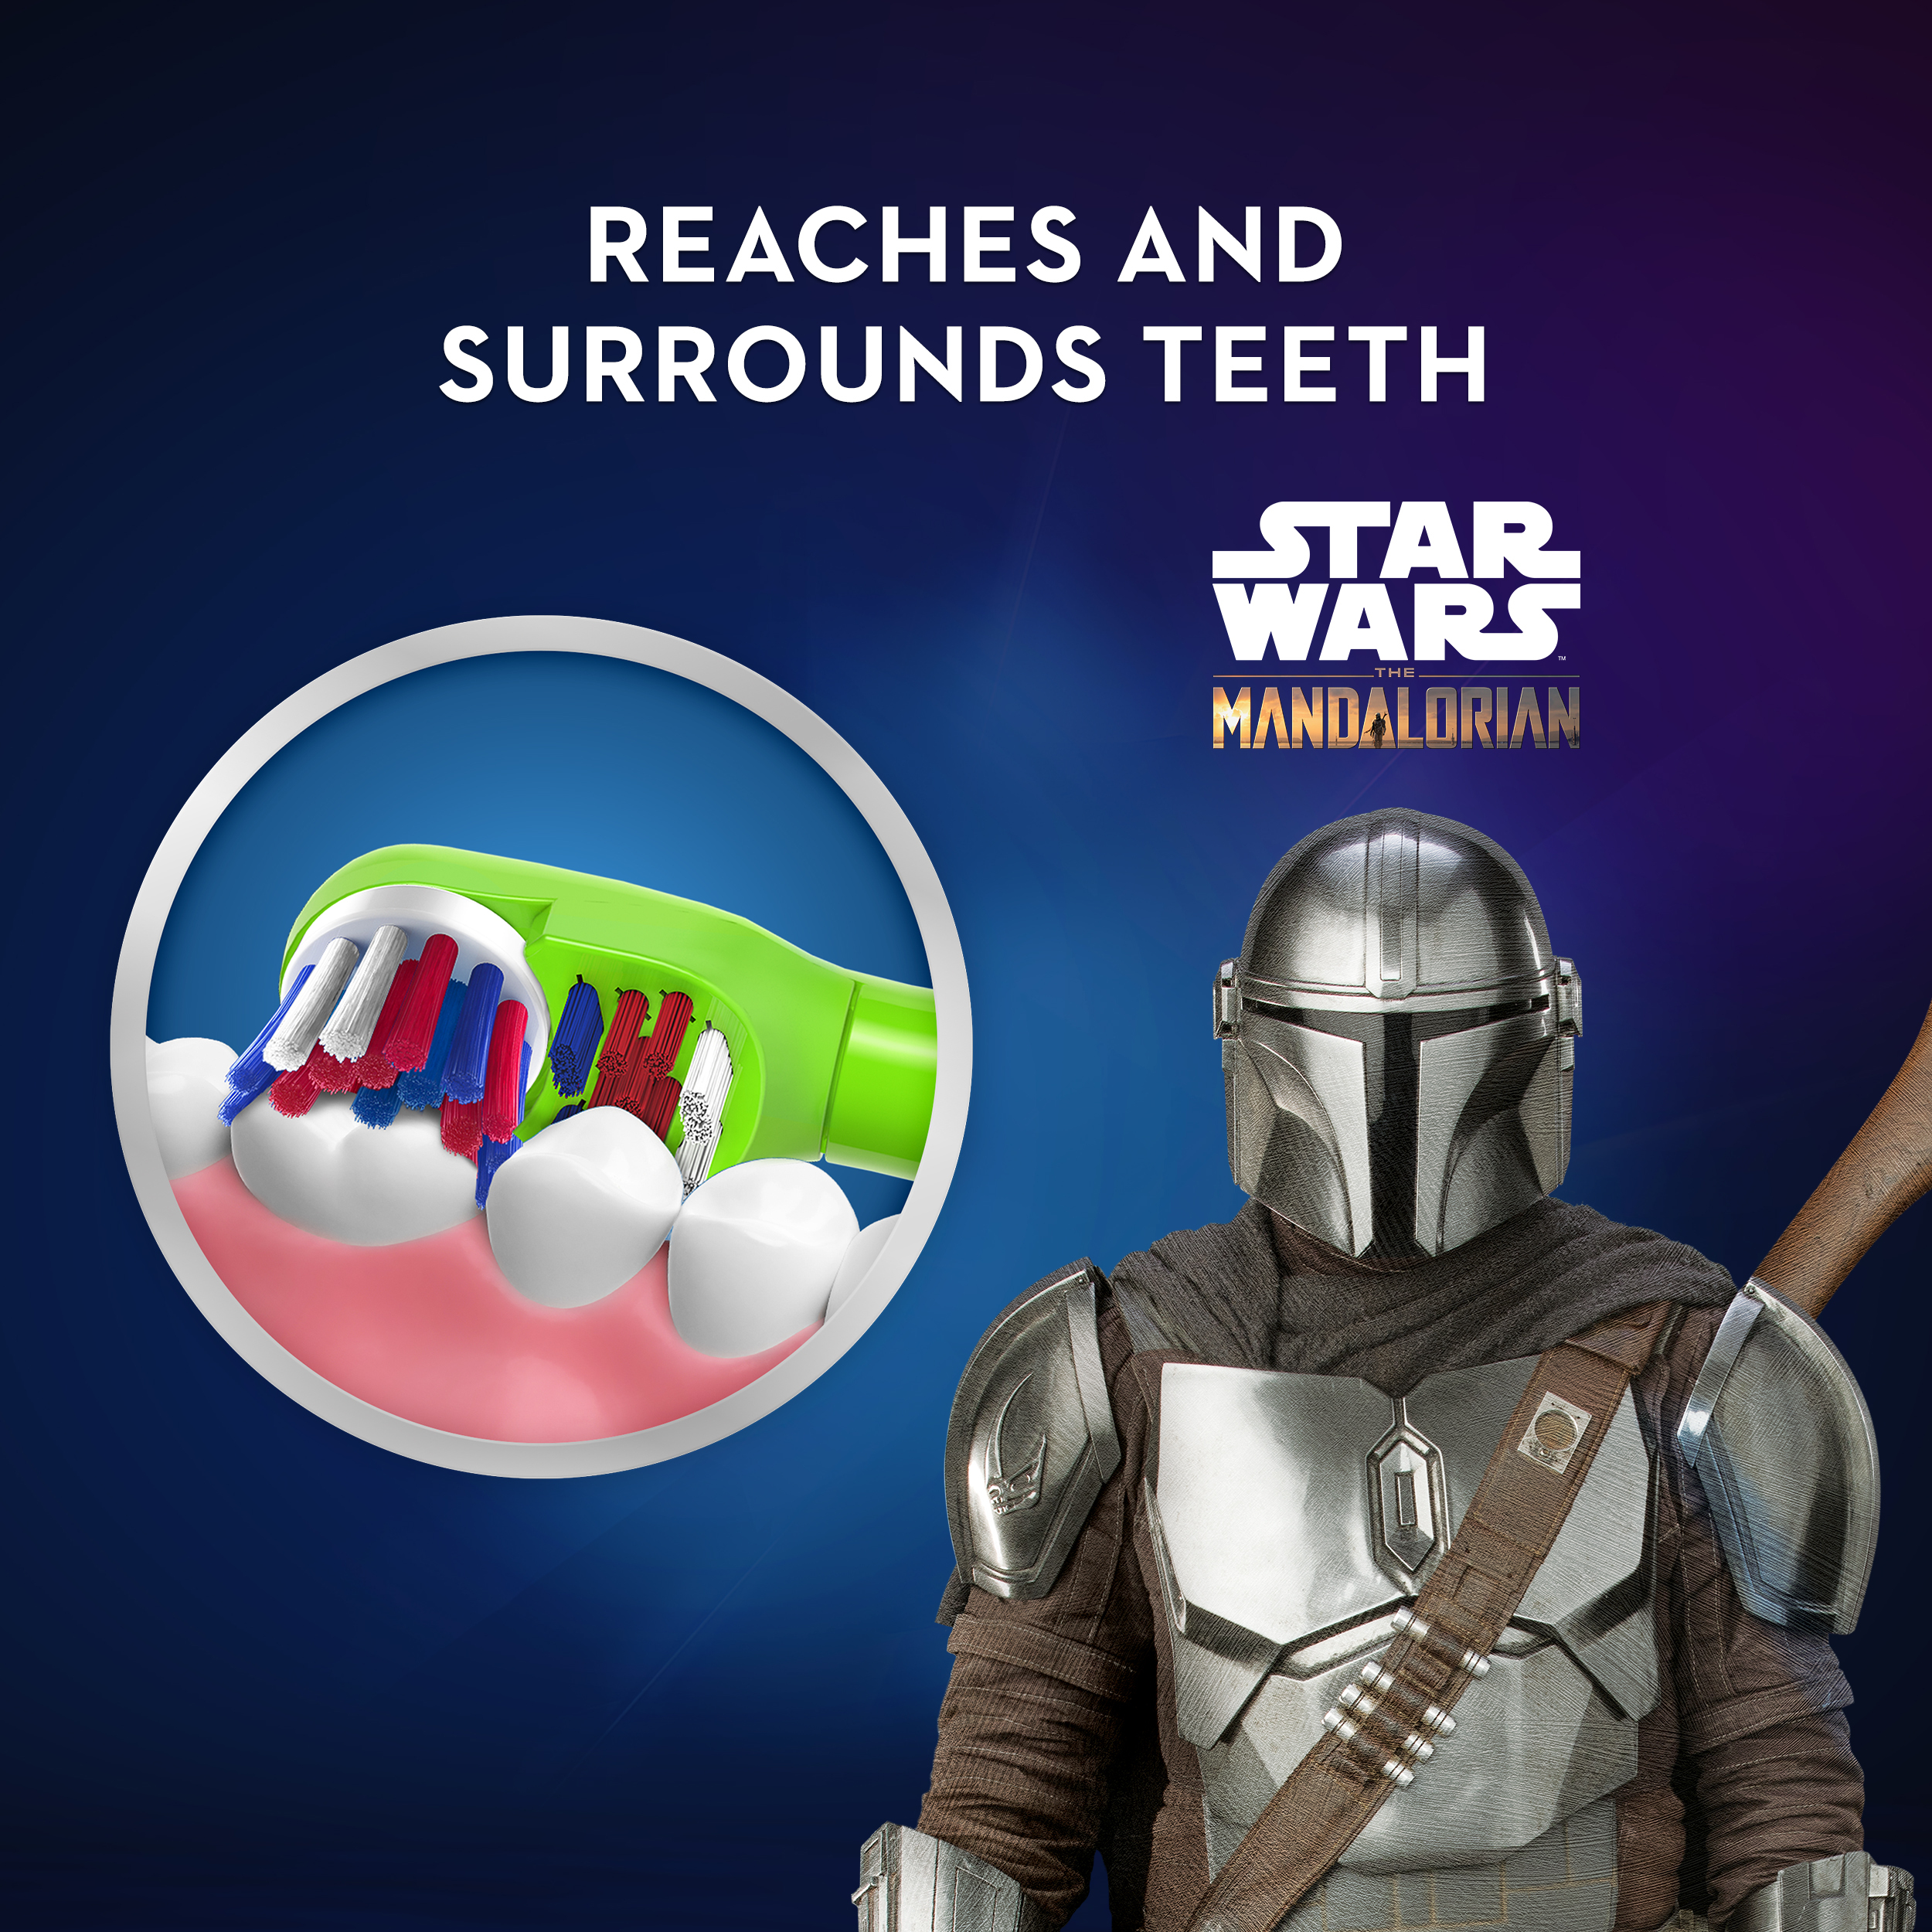 Oral-B Kid's Battery Toothbrush Featuring Lucasfilm's Mandalorian, Full Head, Soft, for Children 3+ - image 2 of 8